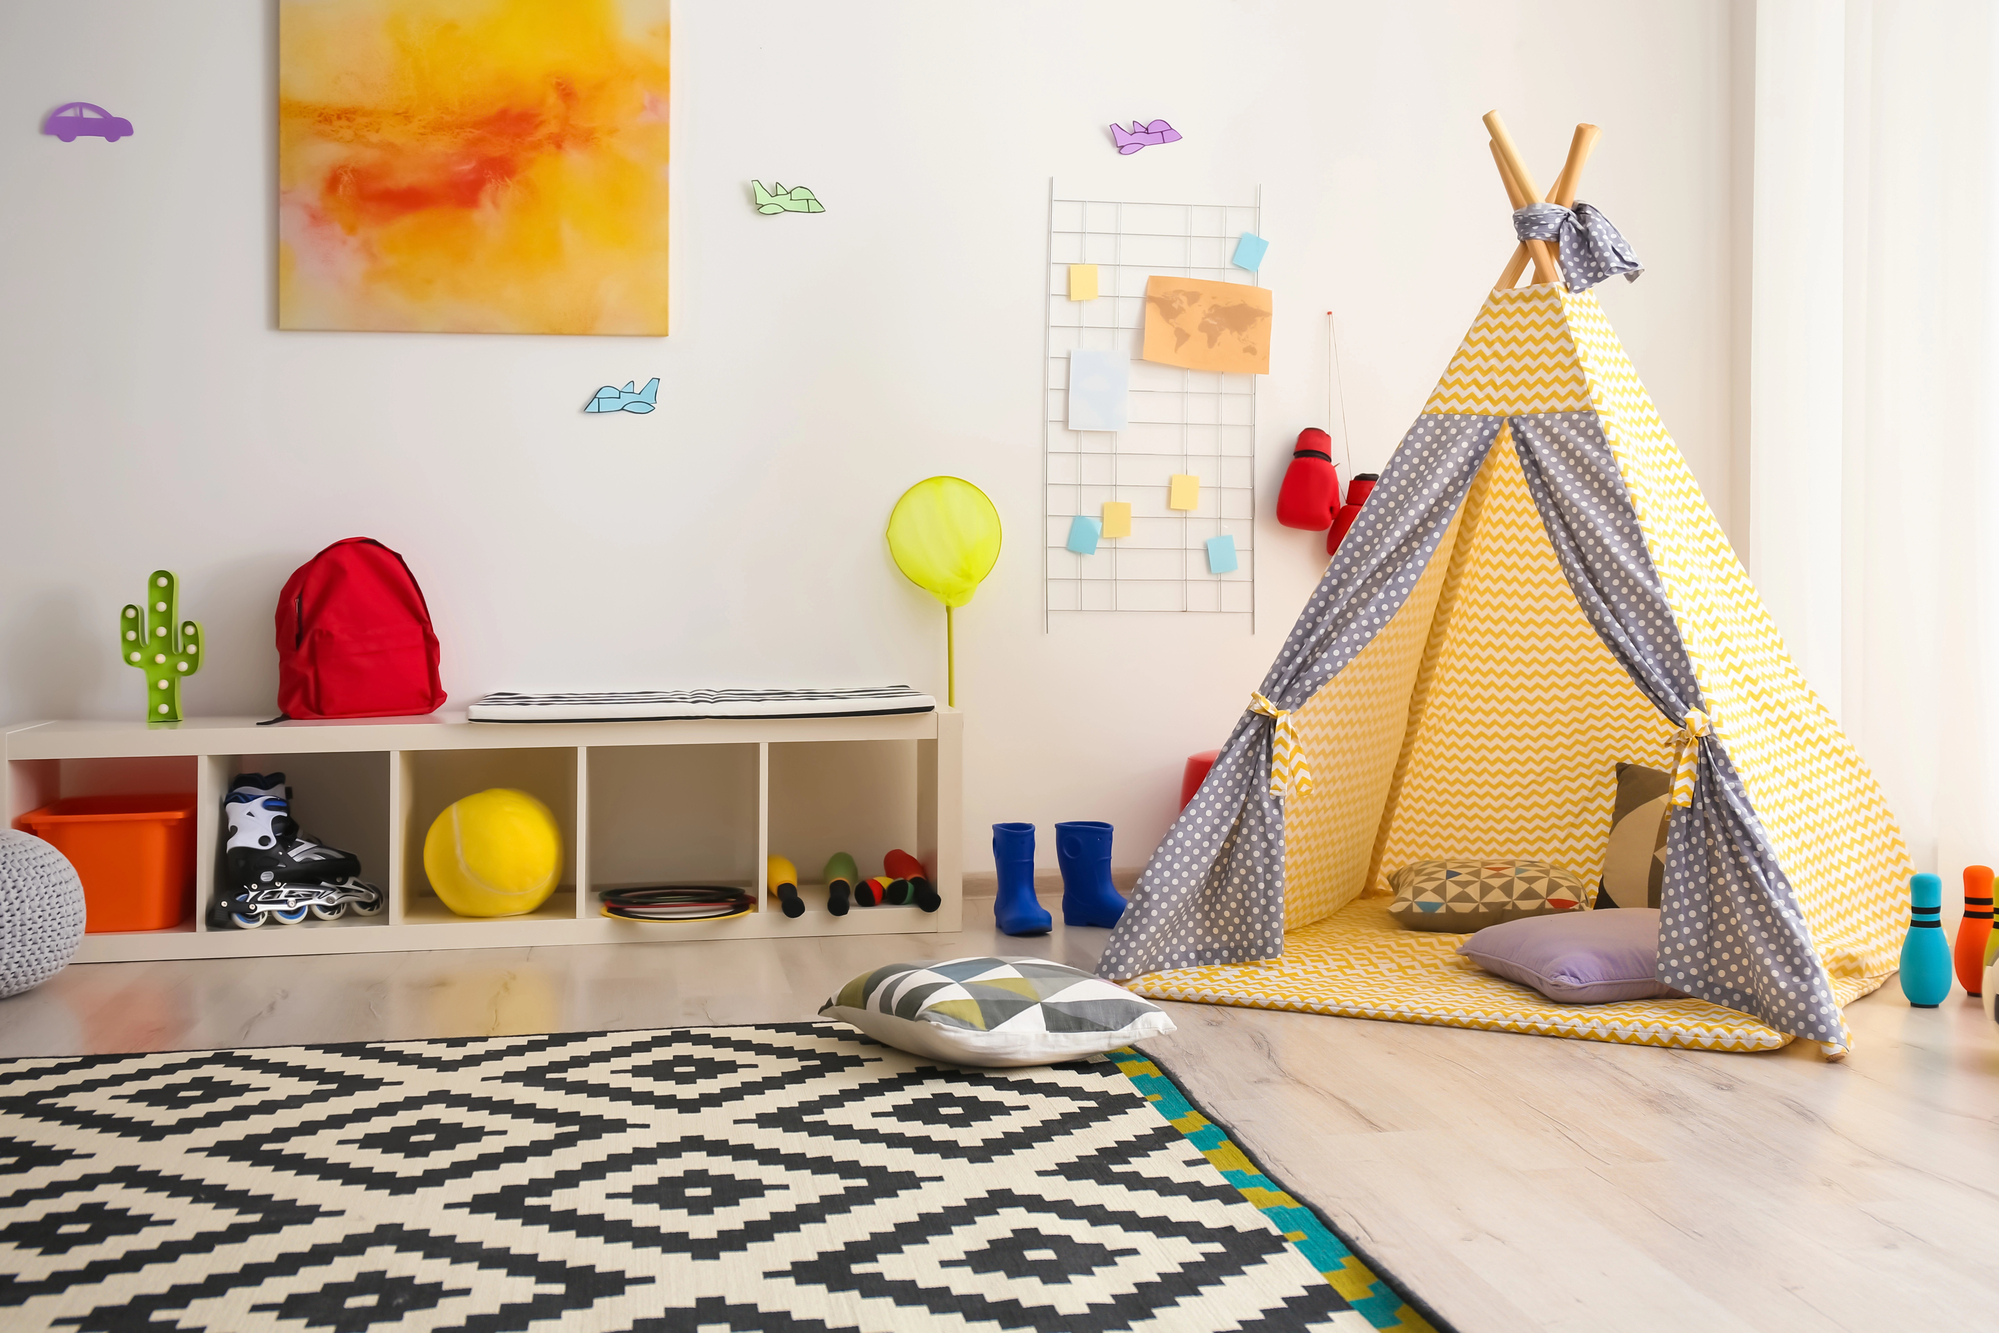 A child's bedroom decorated in bright colors like yellow and red to create a bedroom your kids will adore